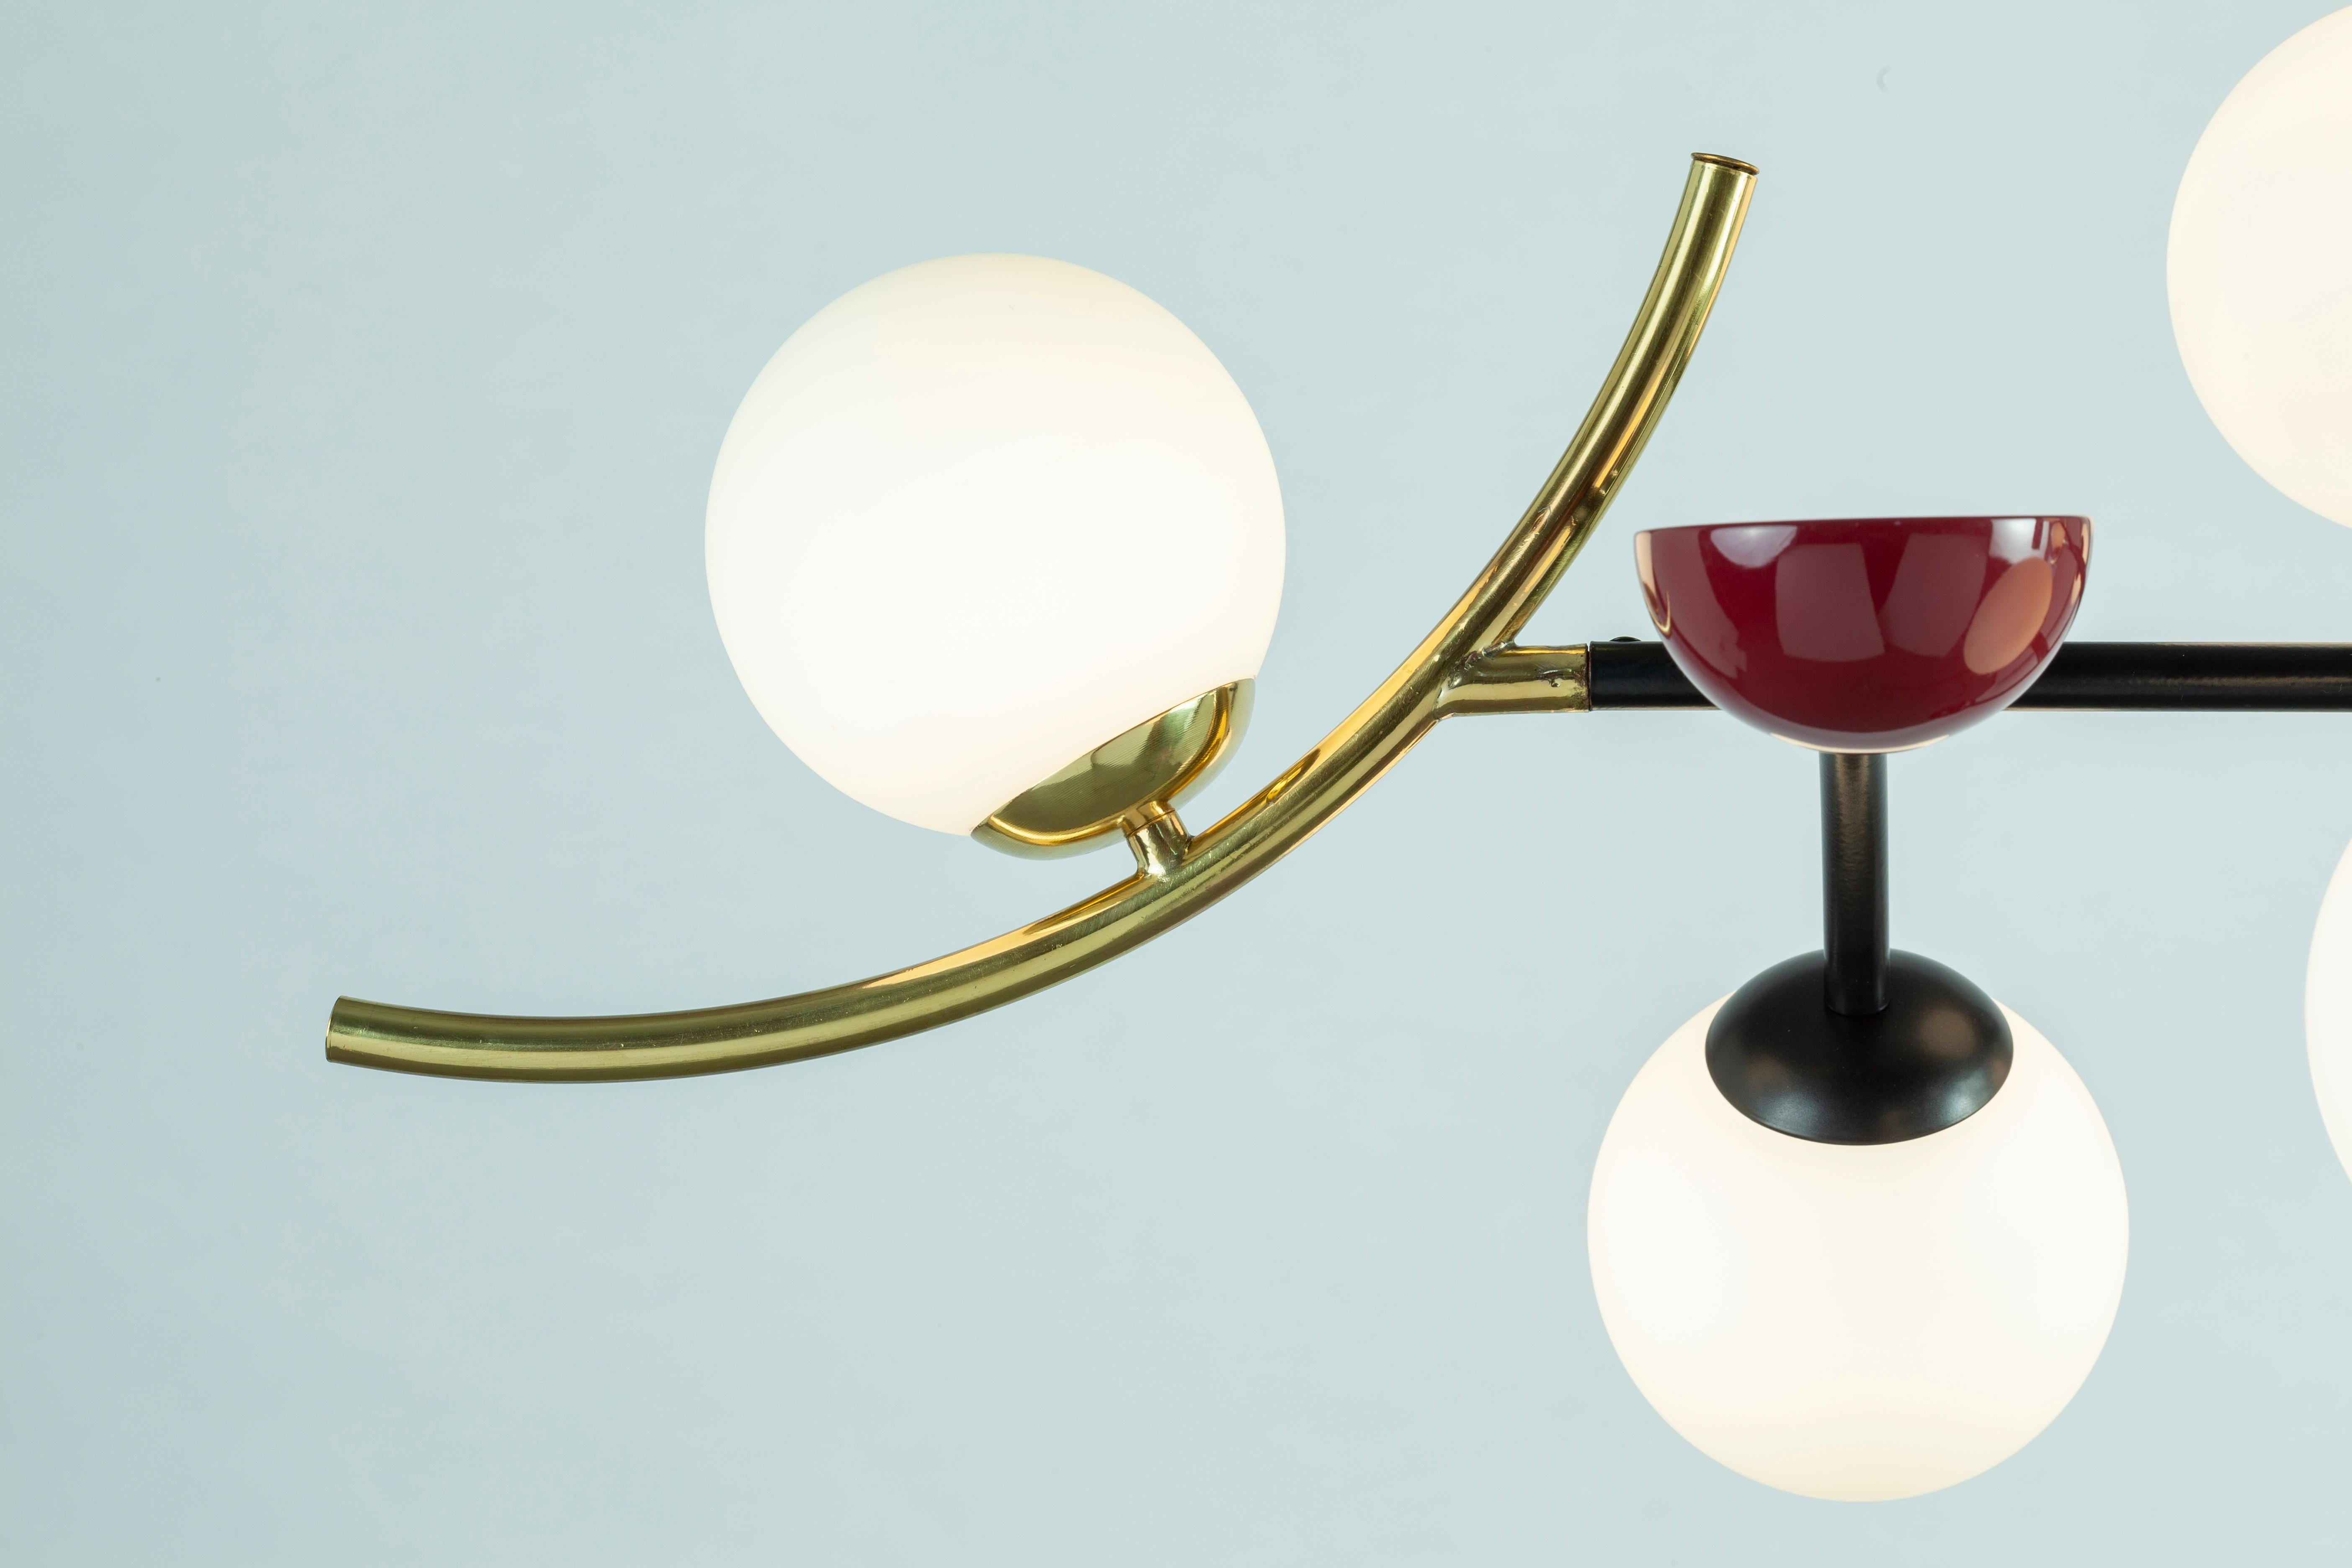 Part ambient light, part artwork, Helio I pendant lamp will highlight any space in all the right ways thanks to its Frosted Glass Globe and sleek Polished Brass details. Made to order and color customizable.

A collection that is raw and expressive